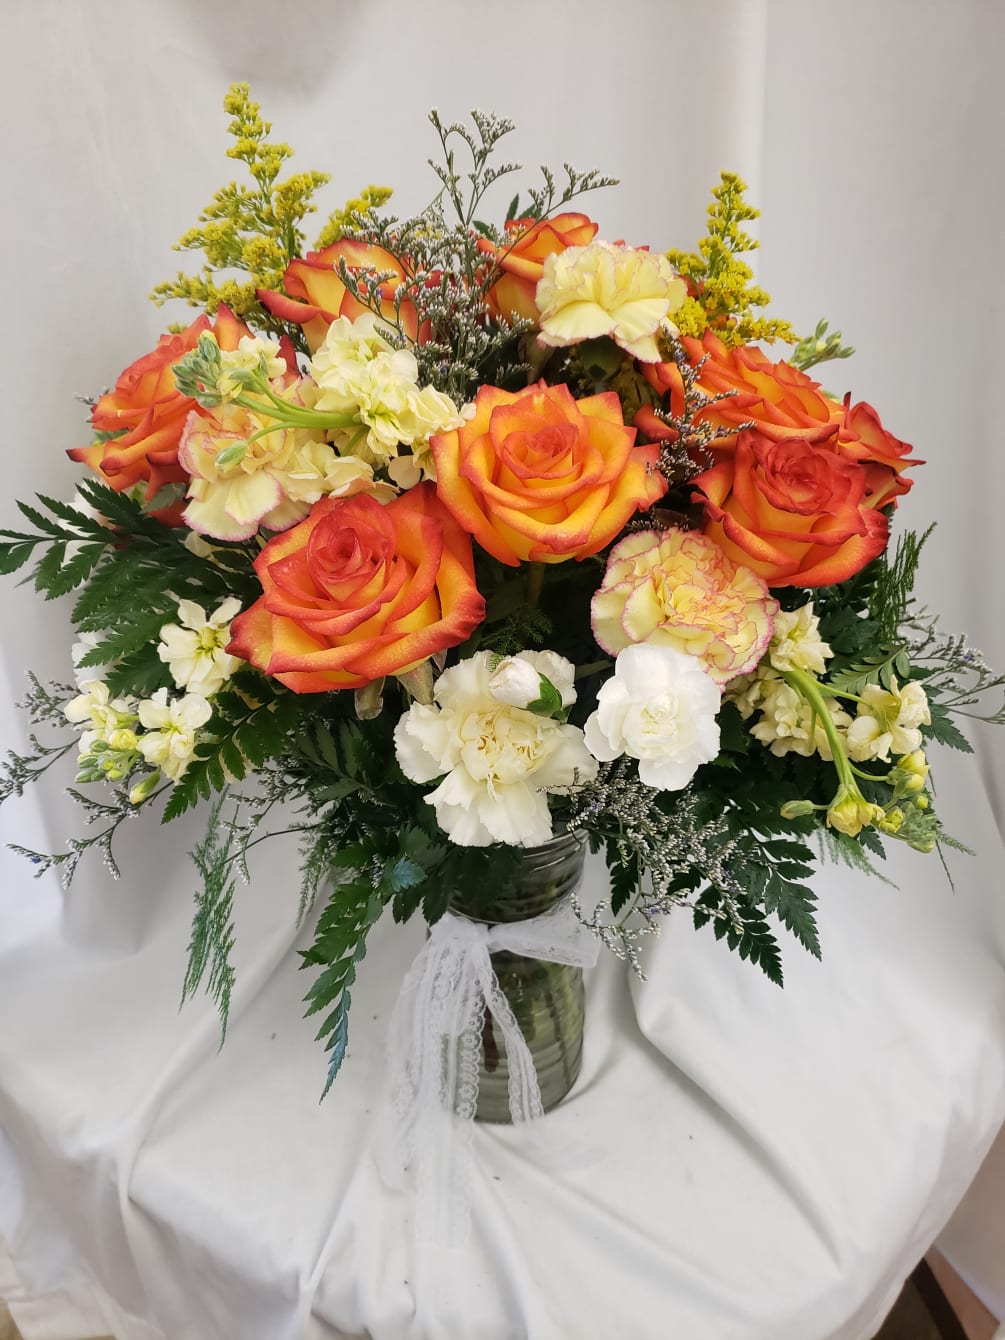 Bright and beautiful vase arrangement with vibrant orange roses, carnations, and fragrant